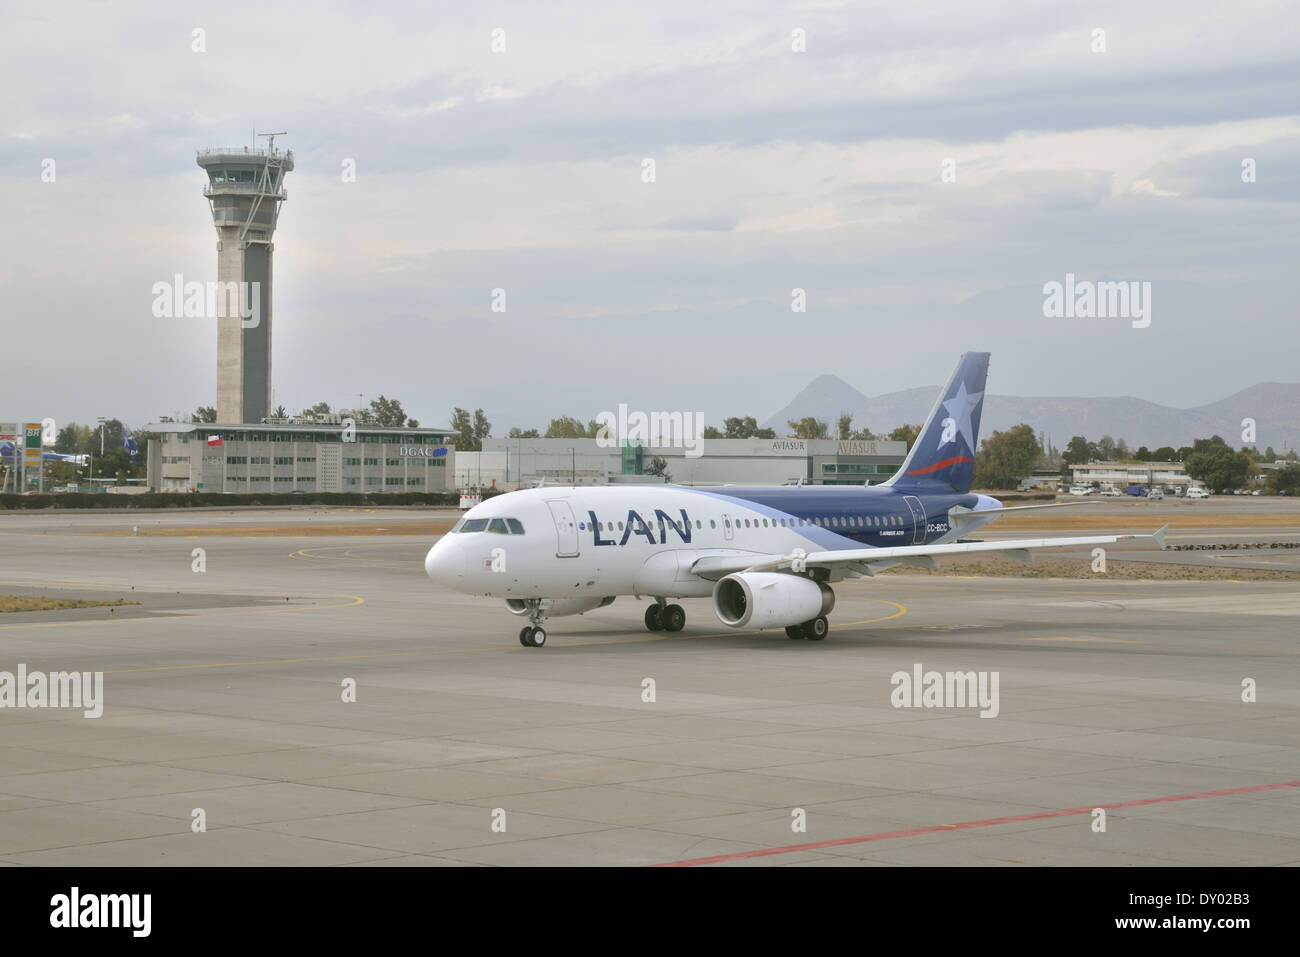 air traffic control tower International airport Santiago de Chile with LAN aircraft Stock Photo